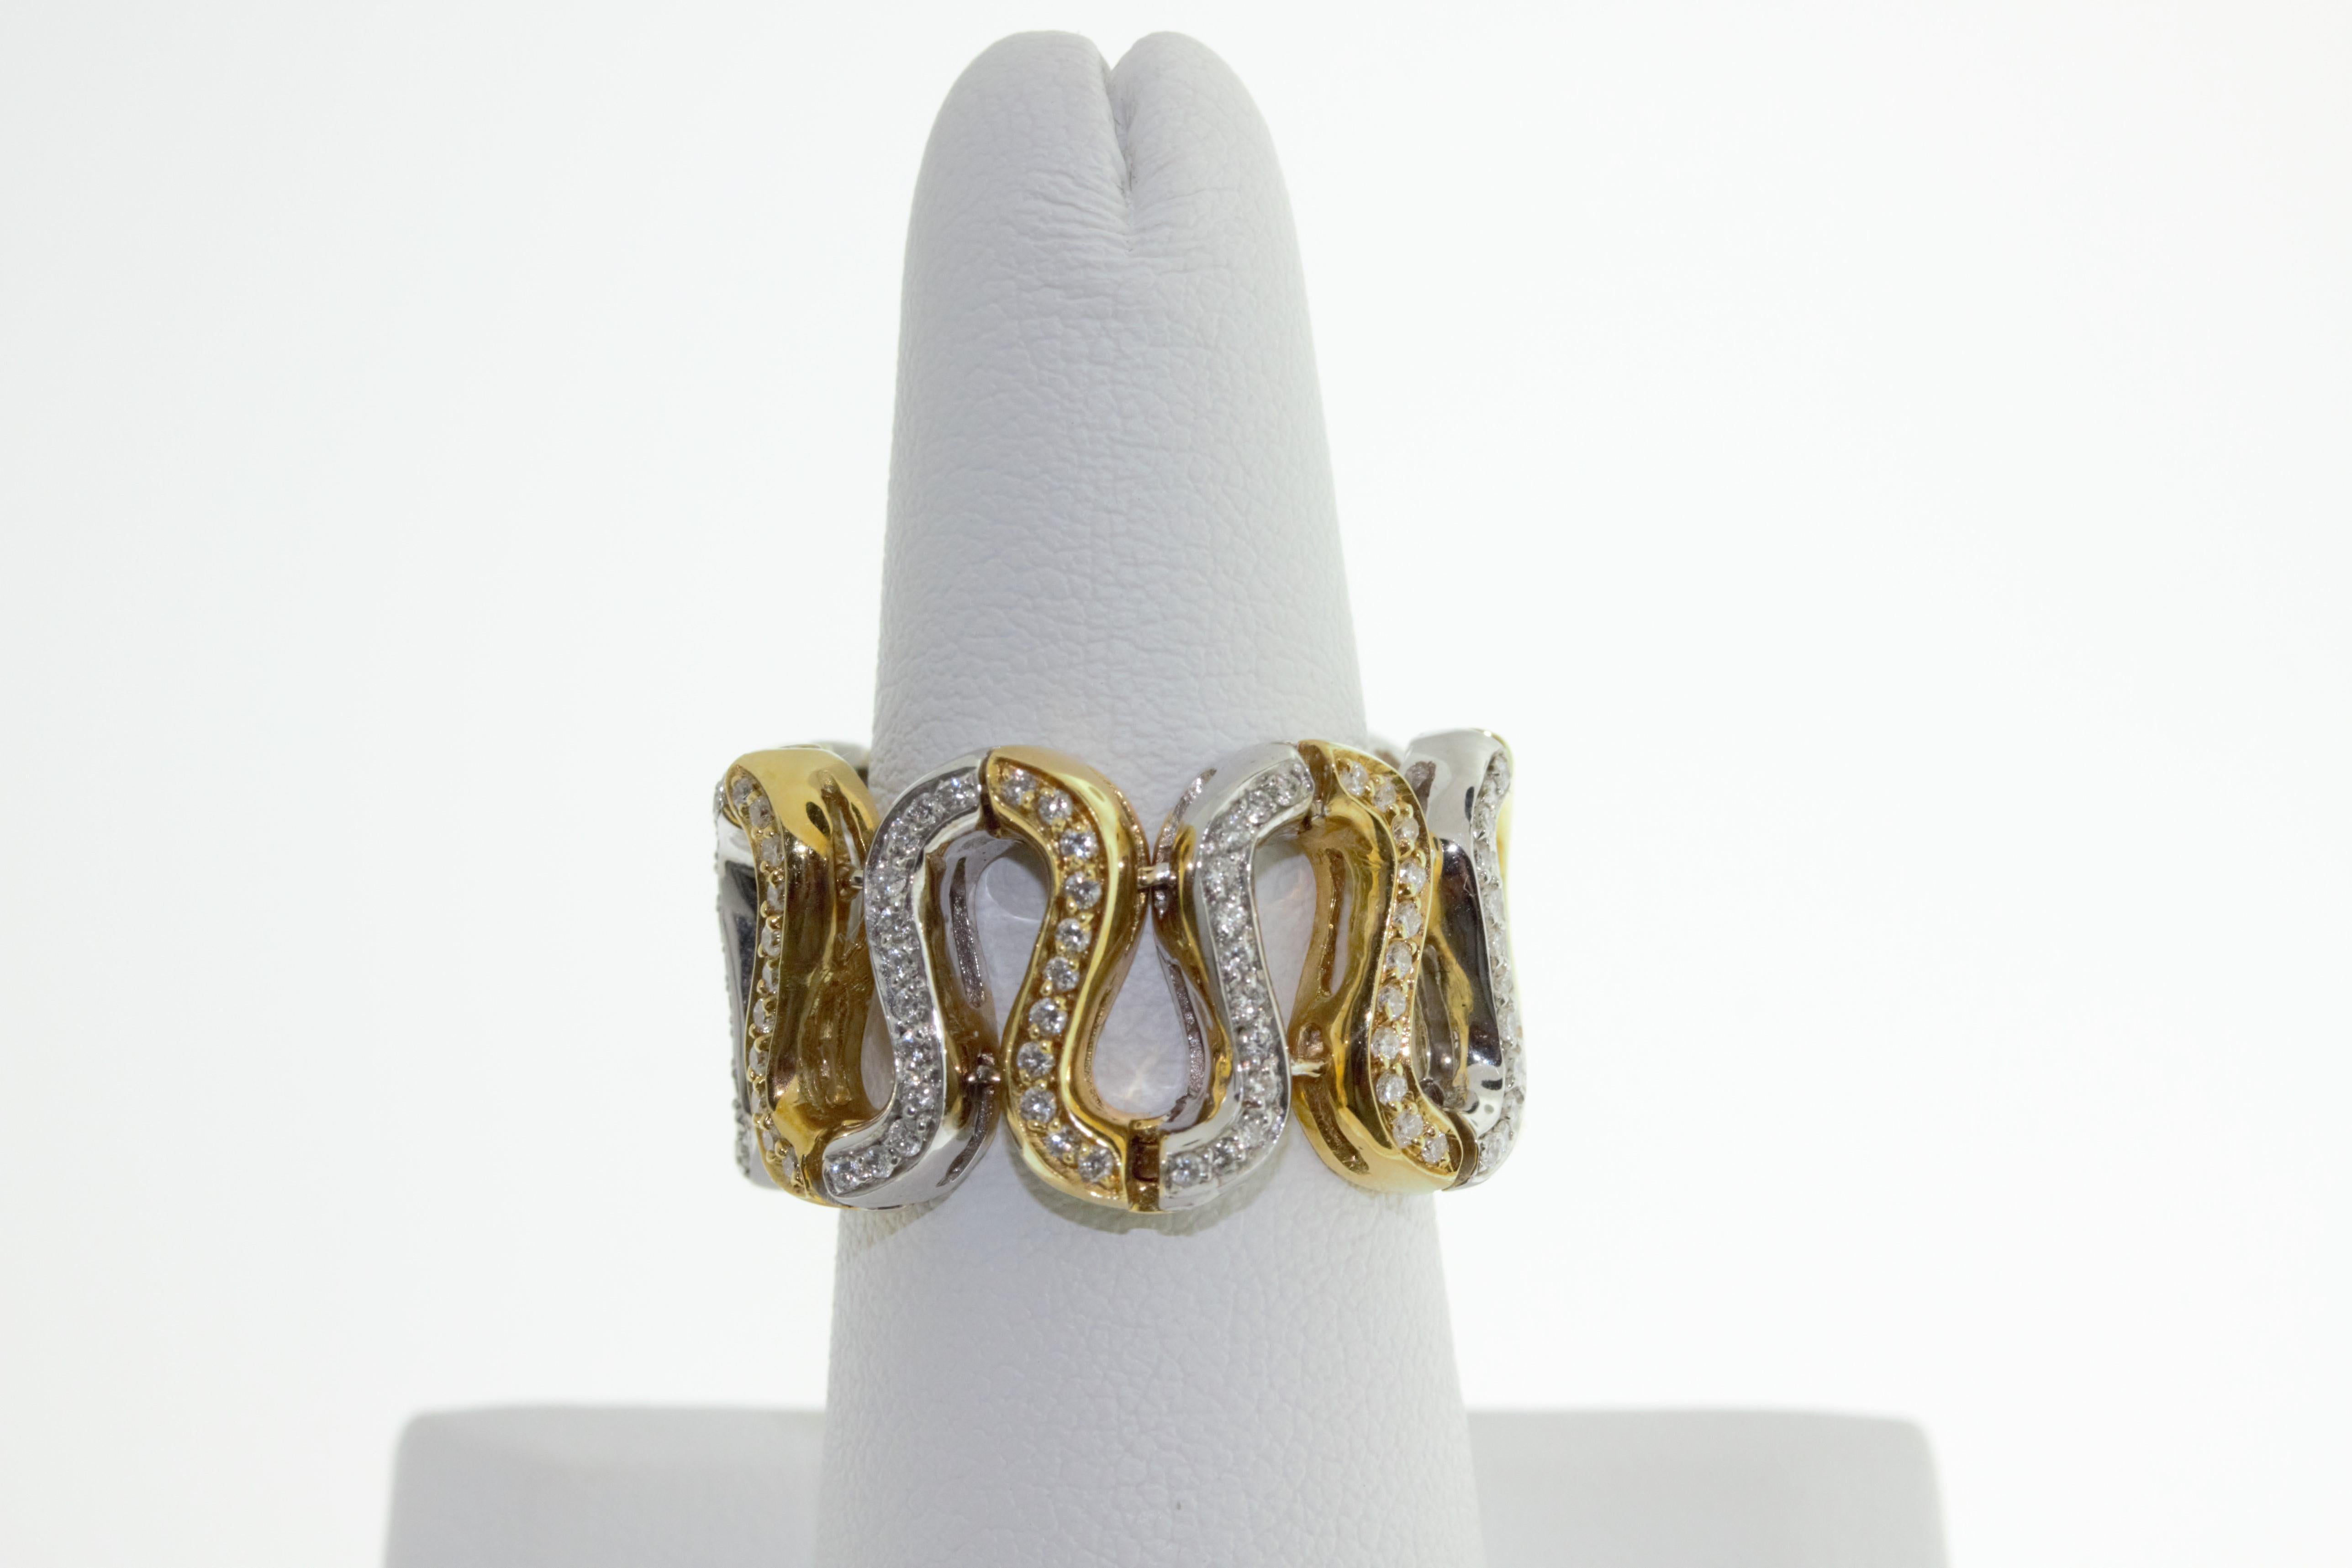 This 18K yellow and white gold ring  features 0.81 carats of round G-H VS diamonds set in a swirl snake pattern. 15 grams of yellow and white gold. Size 8 1/4, ring has stretch. Made in Italy.